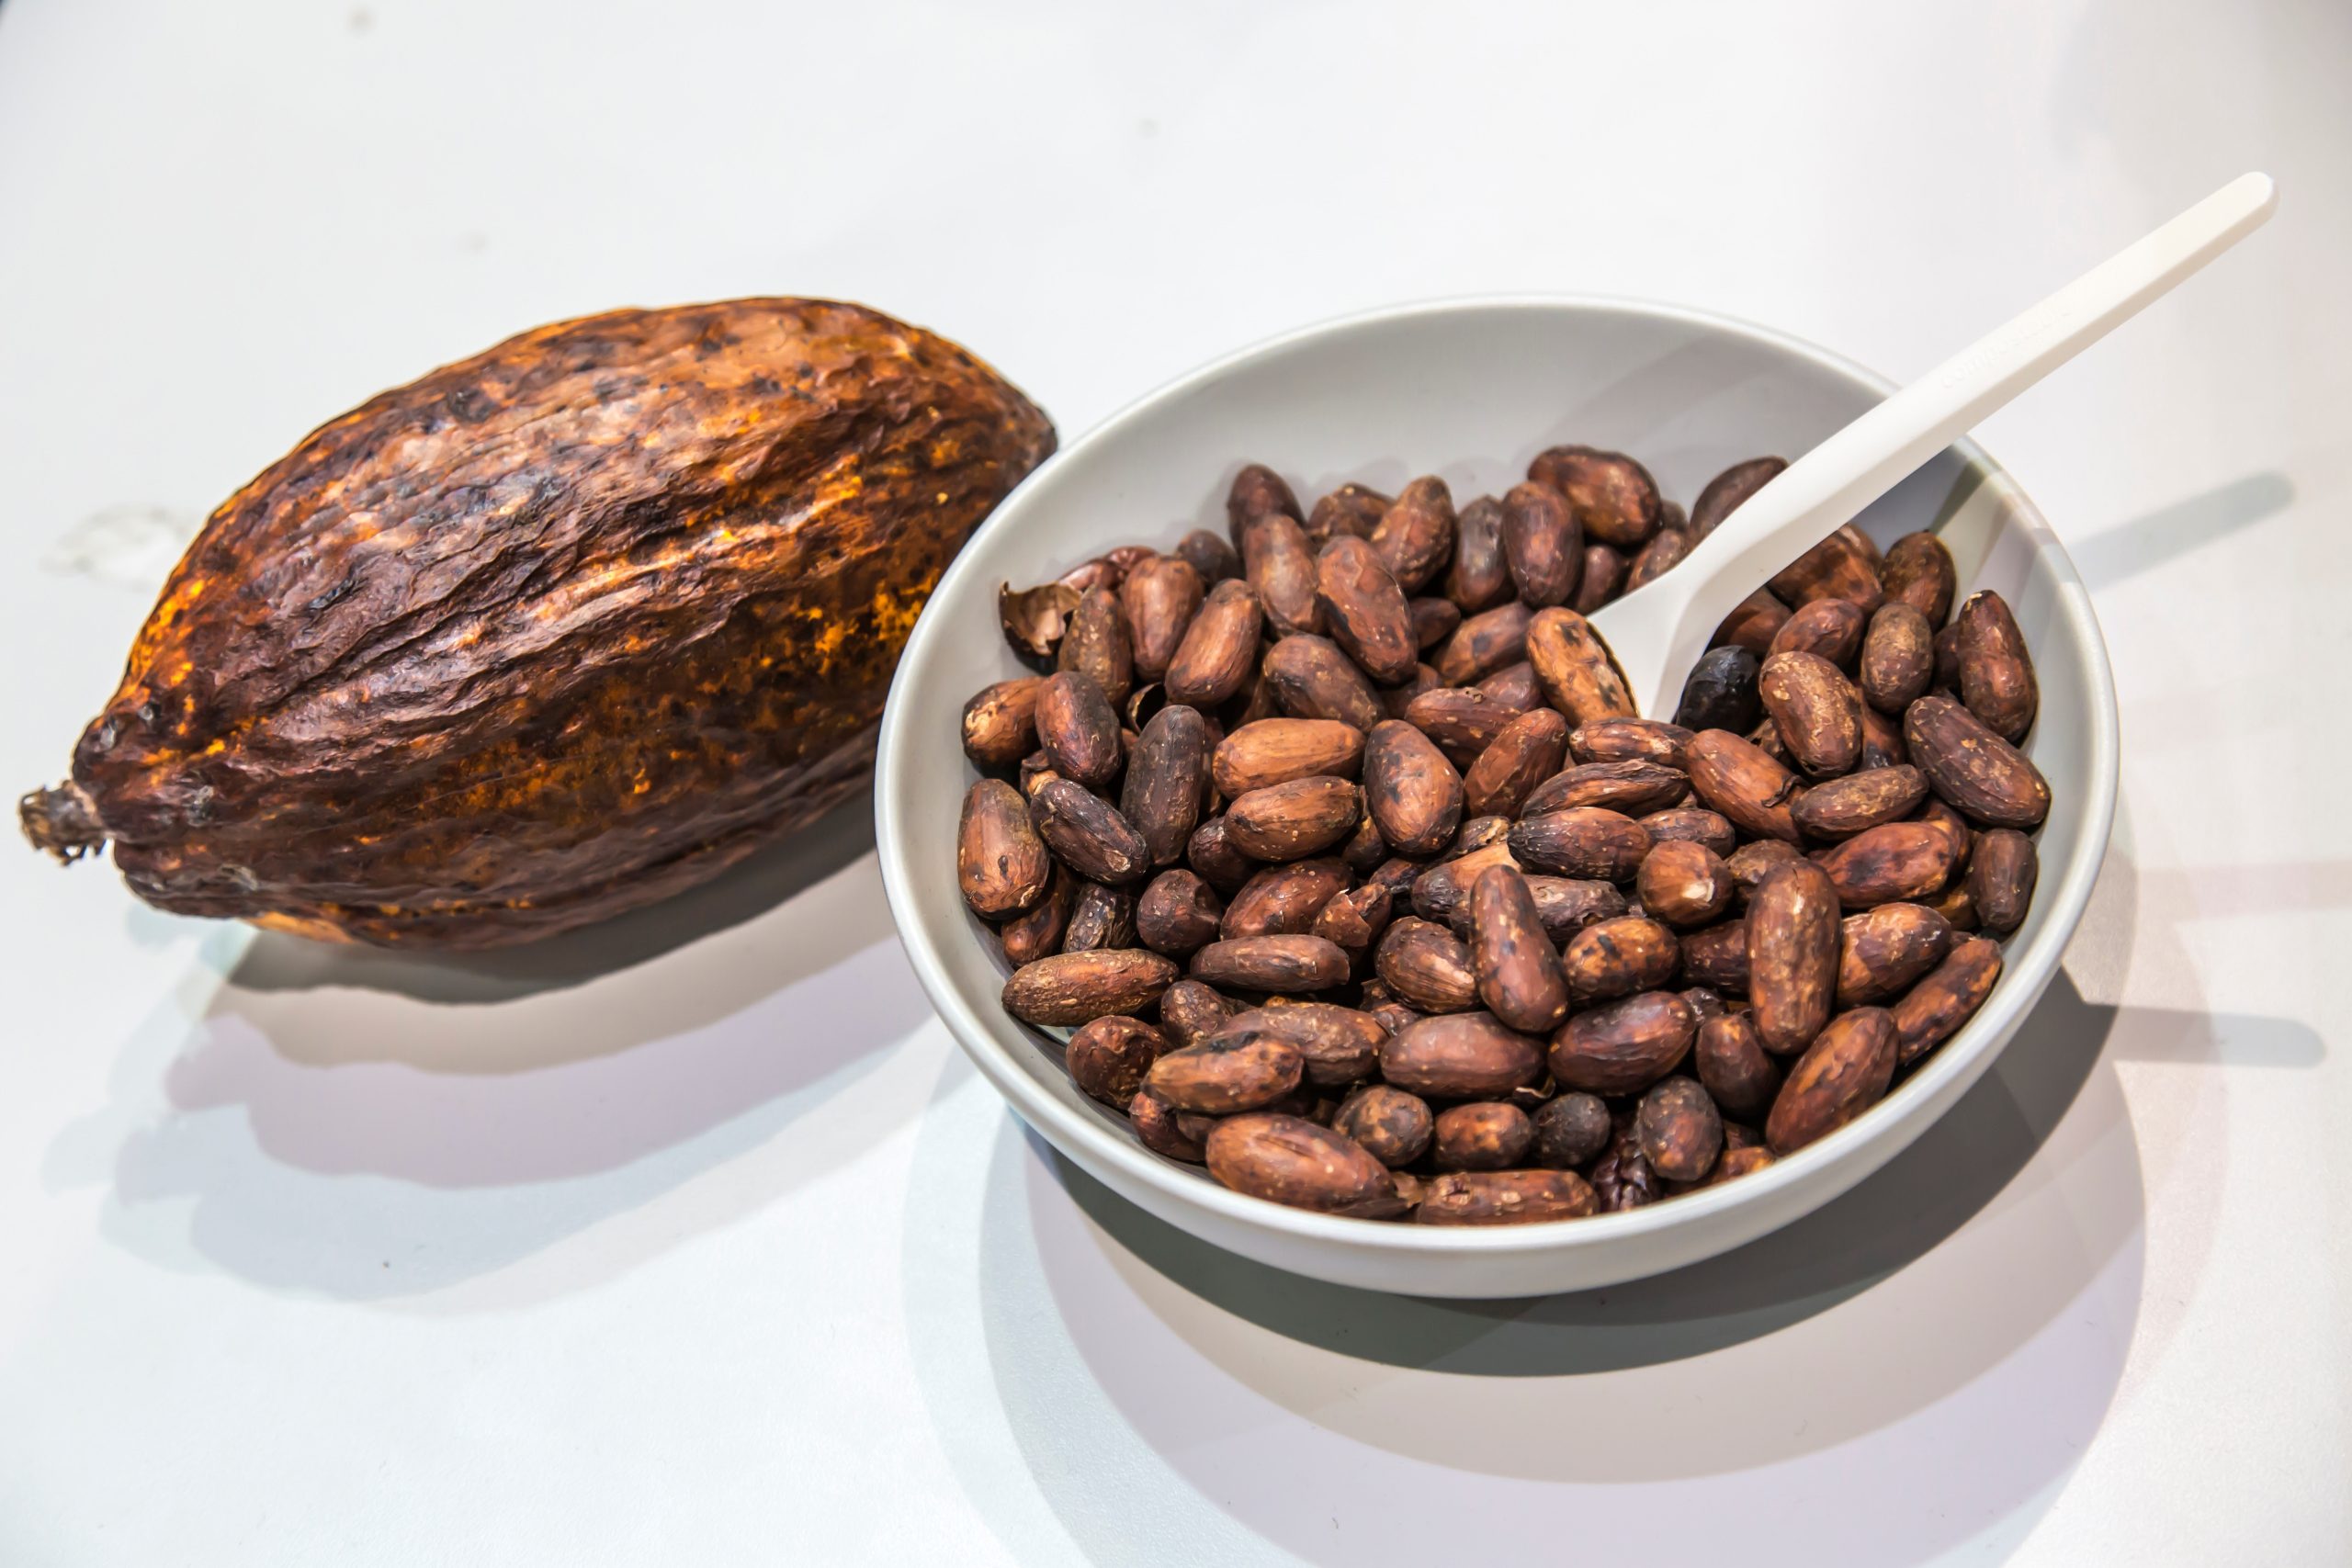 raw cacao beans are aphrodisiacs